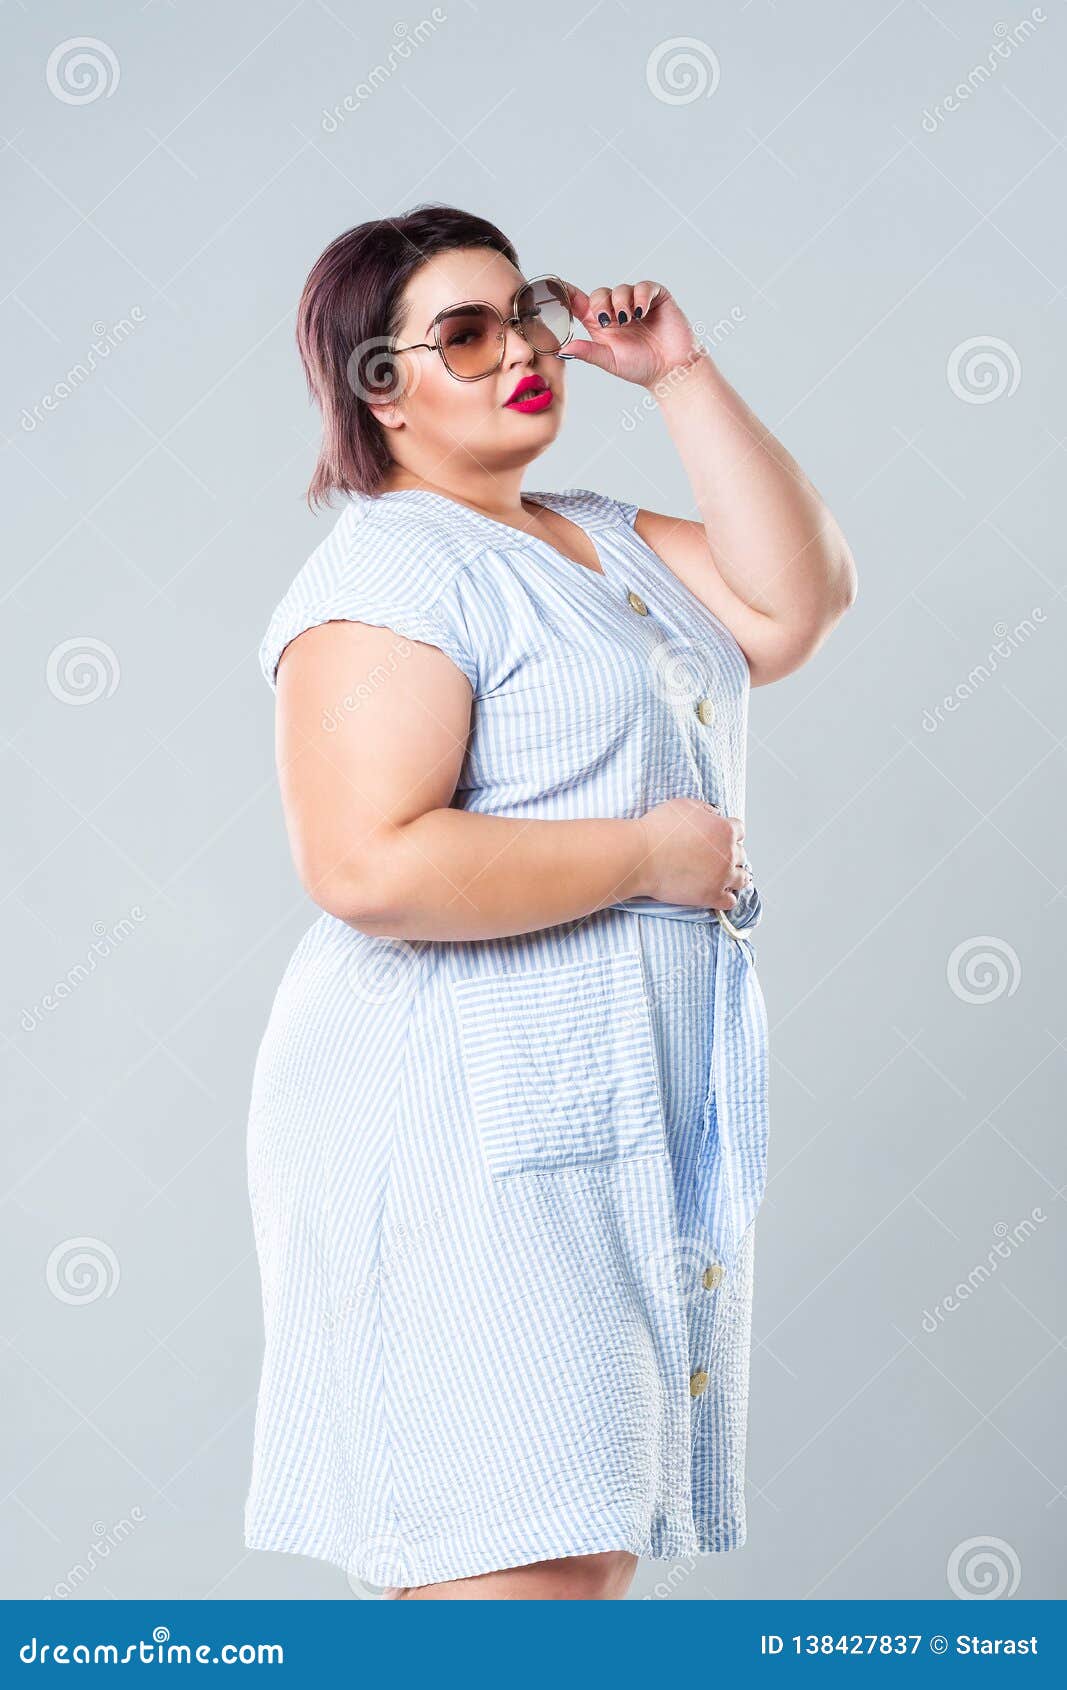 Plus Size Fashion Model in Sunglasses., Fat Woman on Gray Background ... People With Thick Glasses